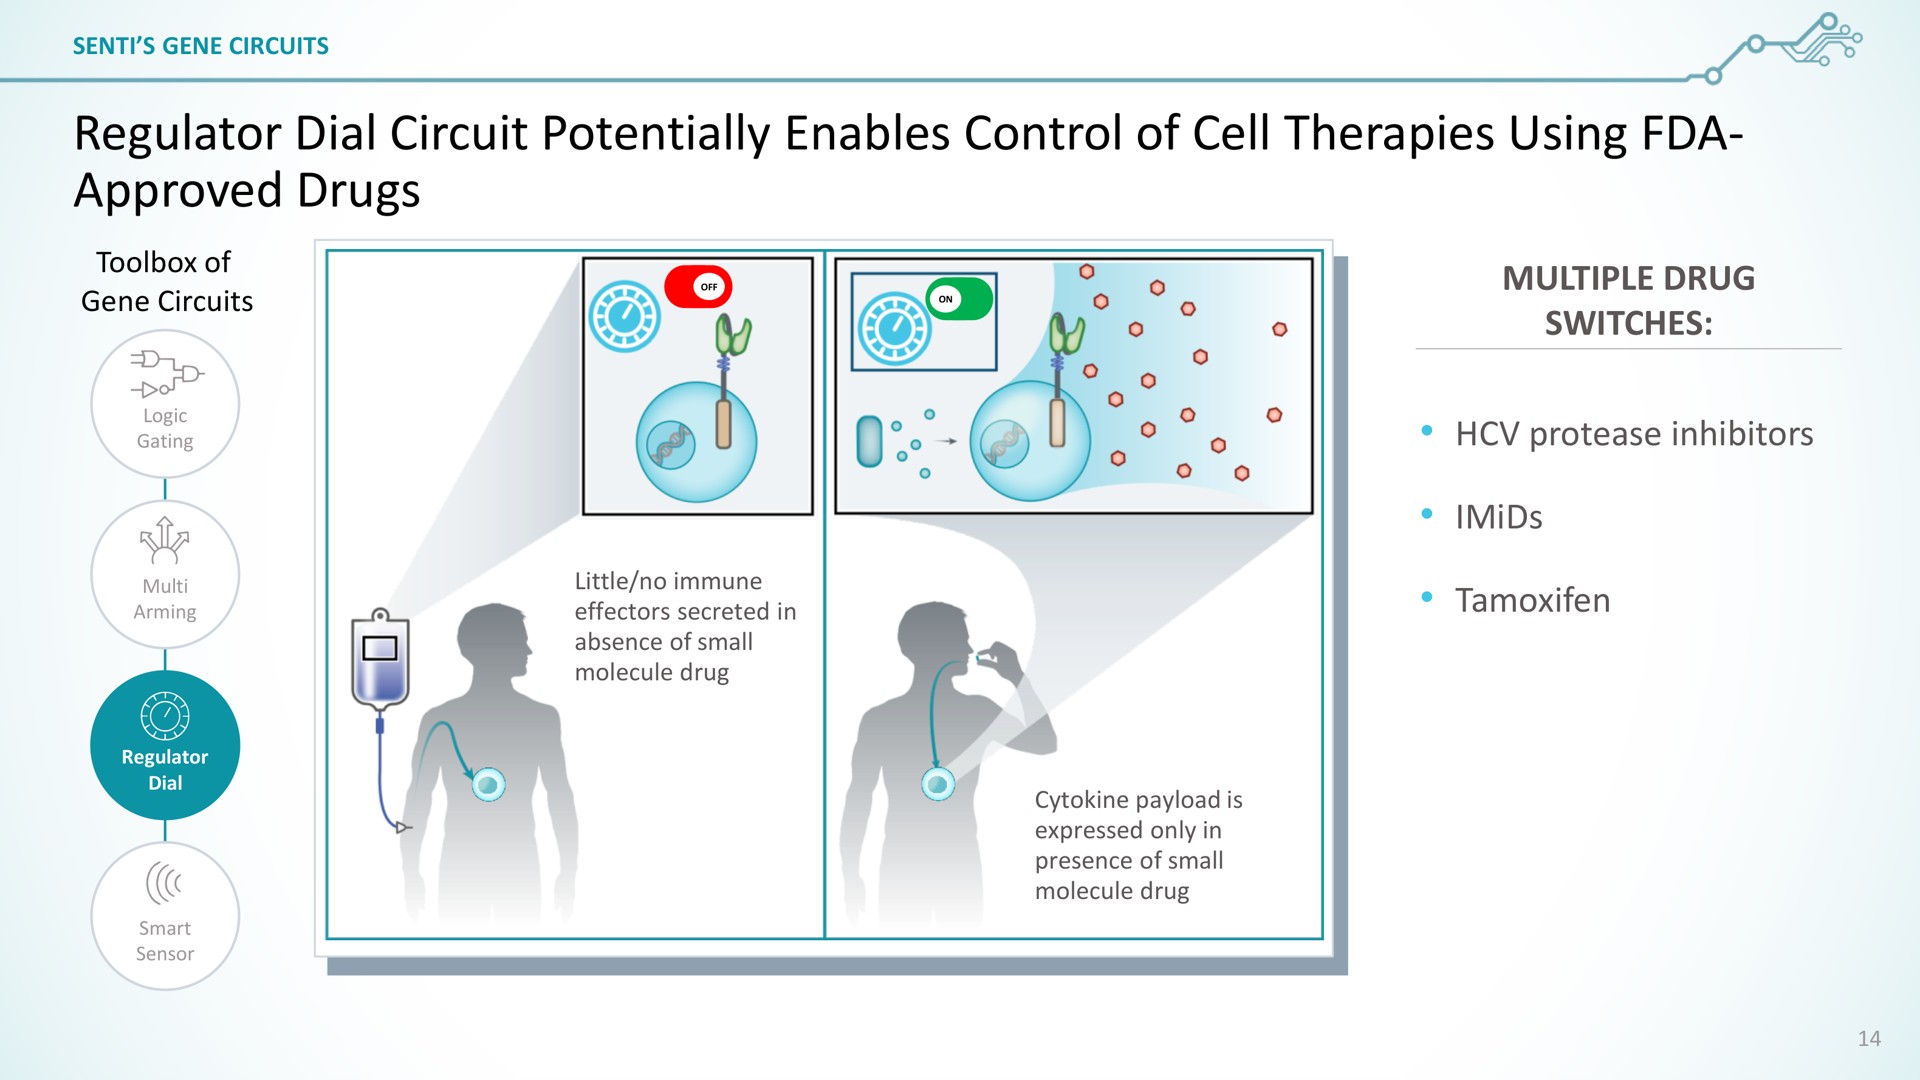 regulator dial circuit potentially enables control of cell therapies using approved drugs | SentiBio